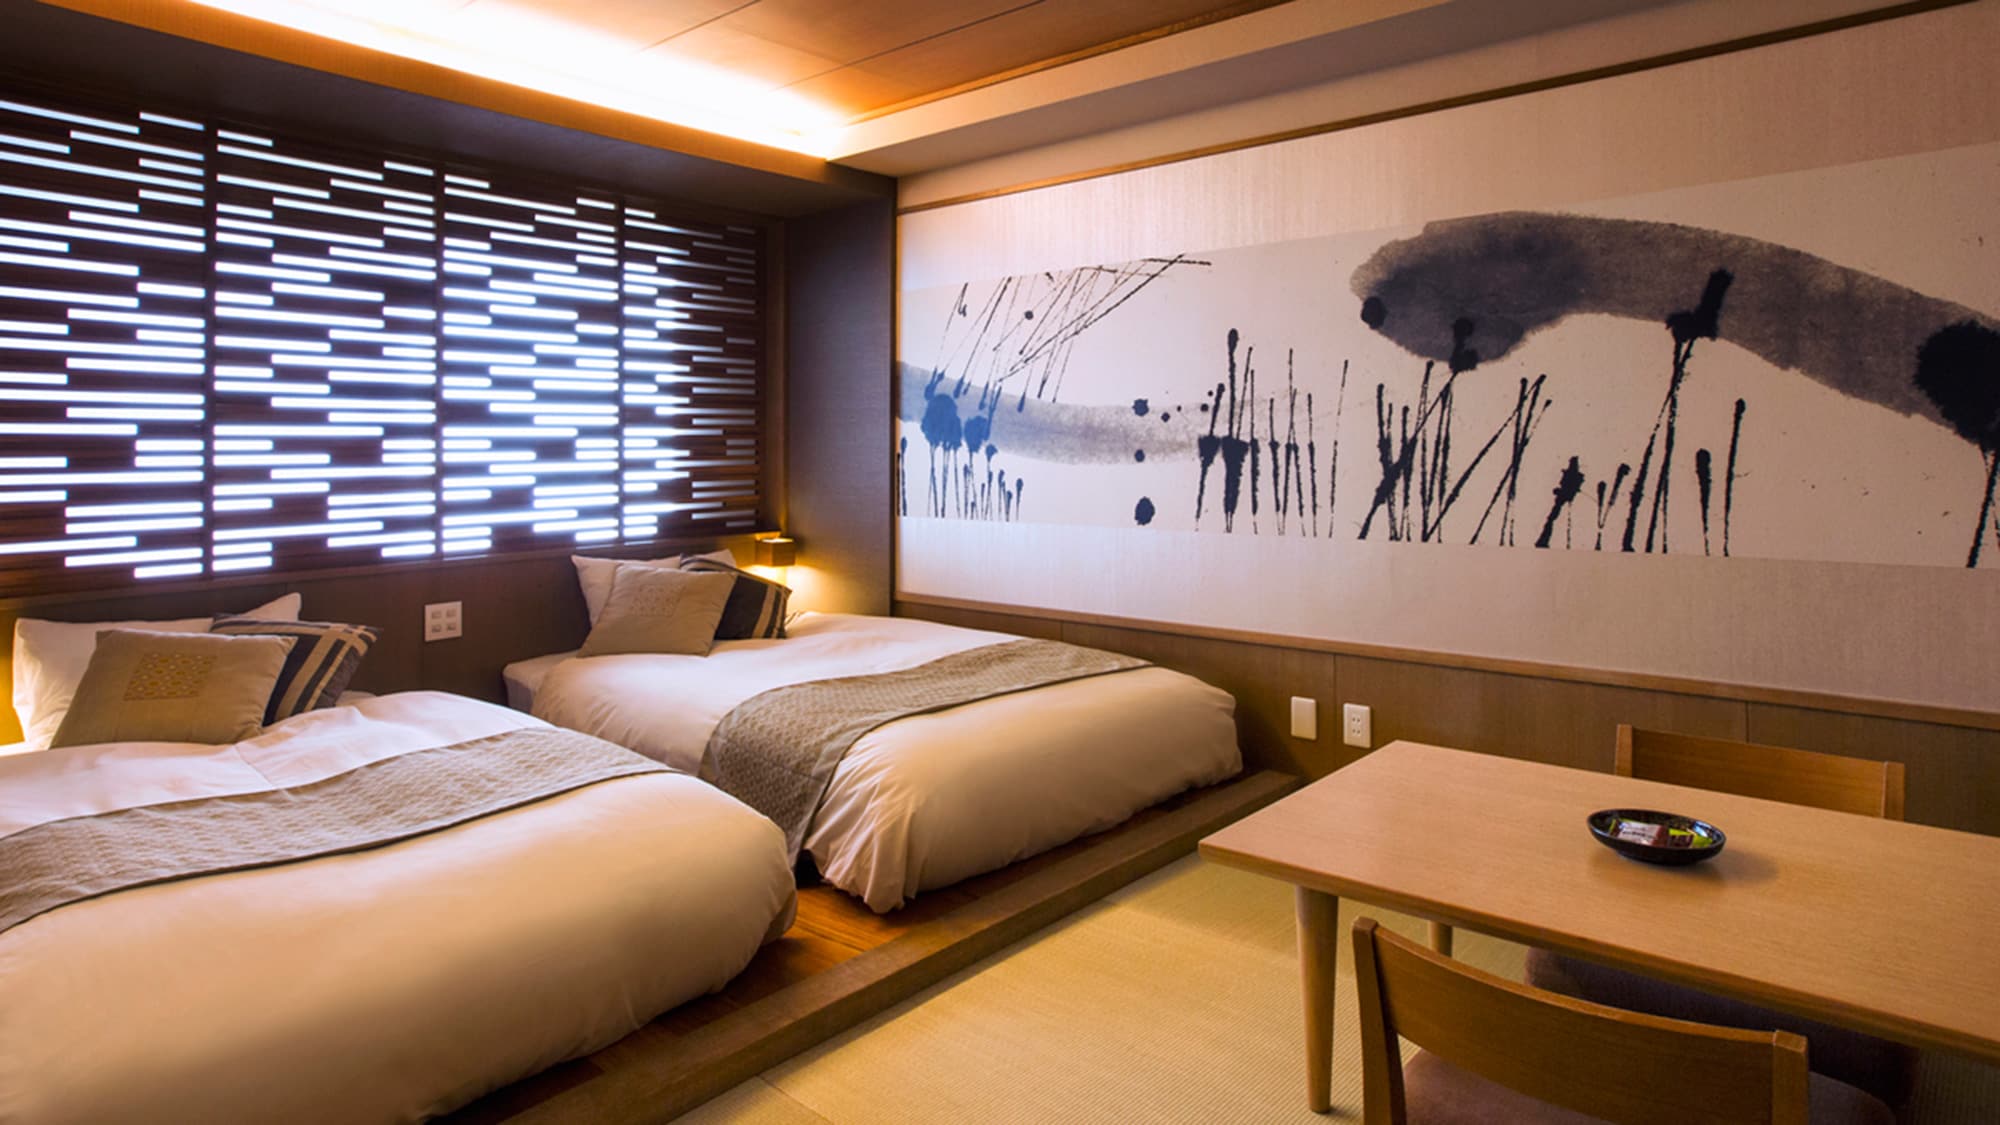 [Japanese modern] A room with tatami mats that has a Japanese atmosphere. 21㎡ in size.